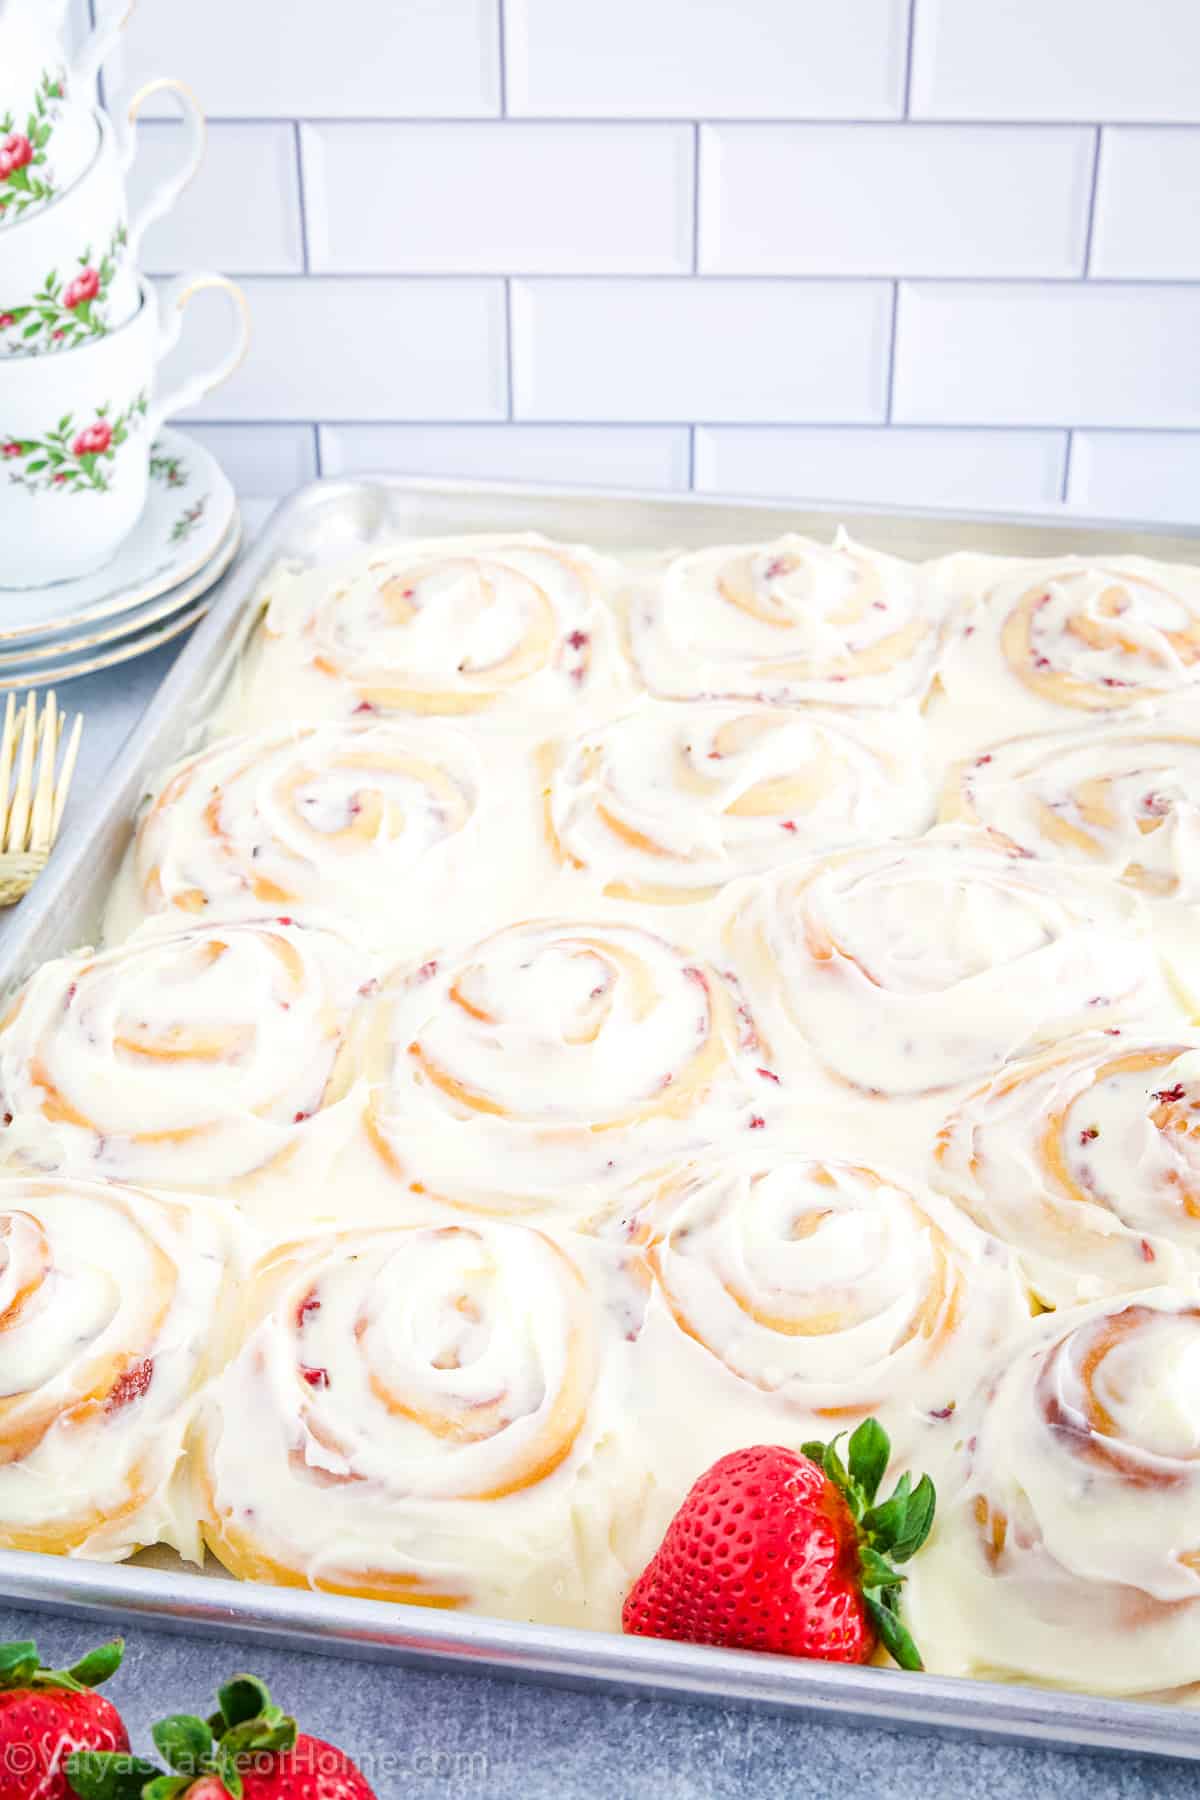 These Strawberry Cinnamon Rolls are a delicious twist to a classic we love, featuring cinnamon rolls with fresh strawberries and jam, topped with frosting!